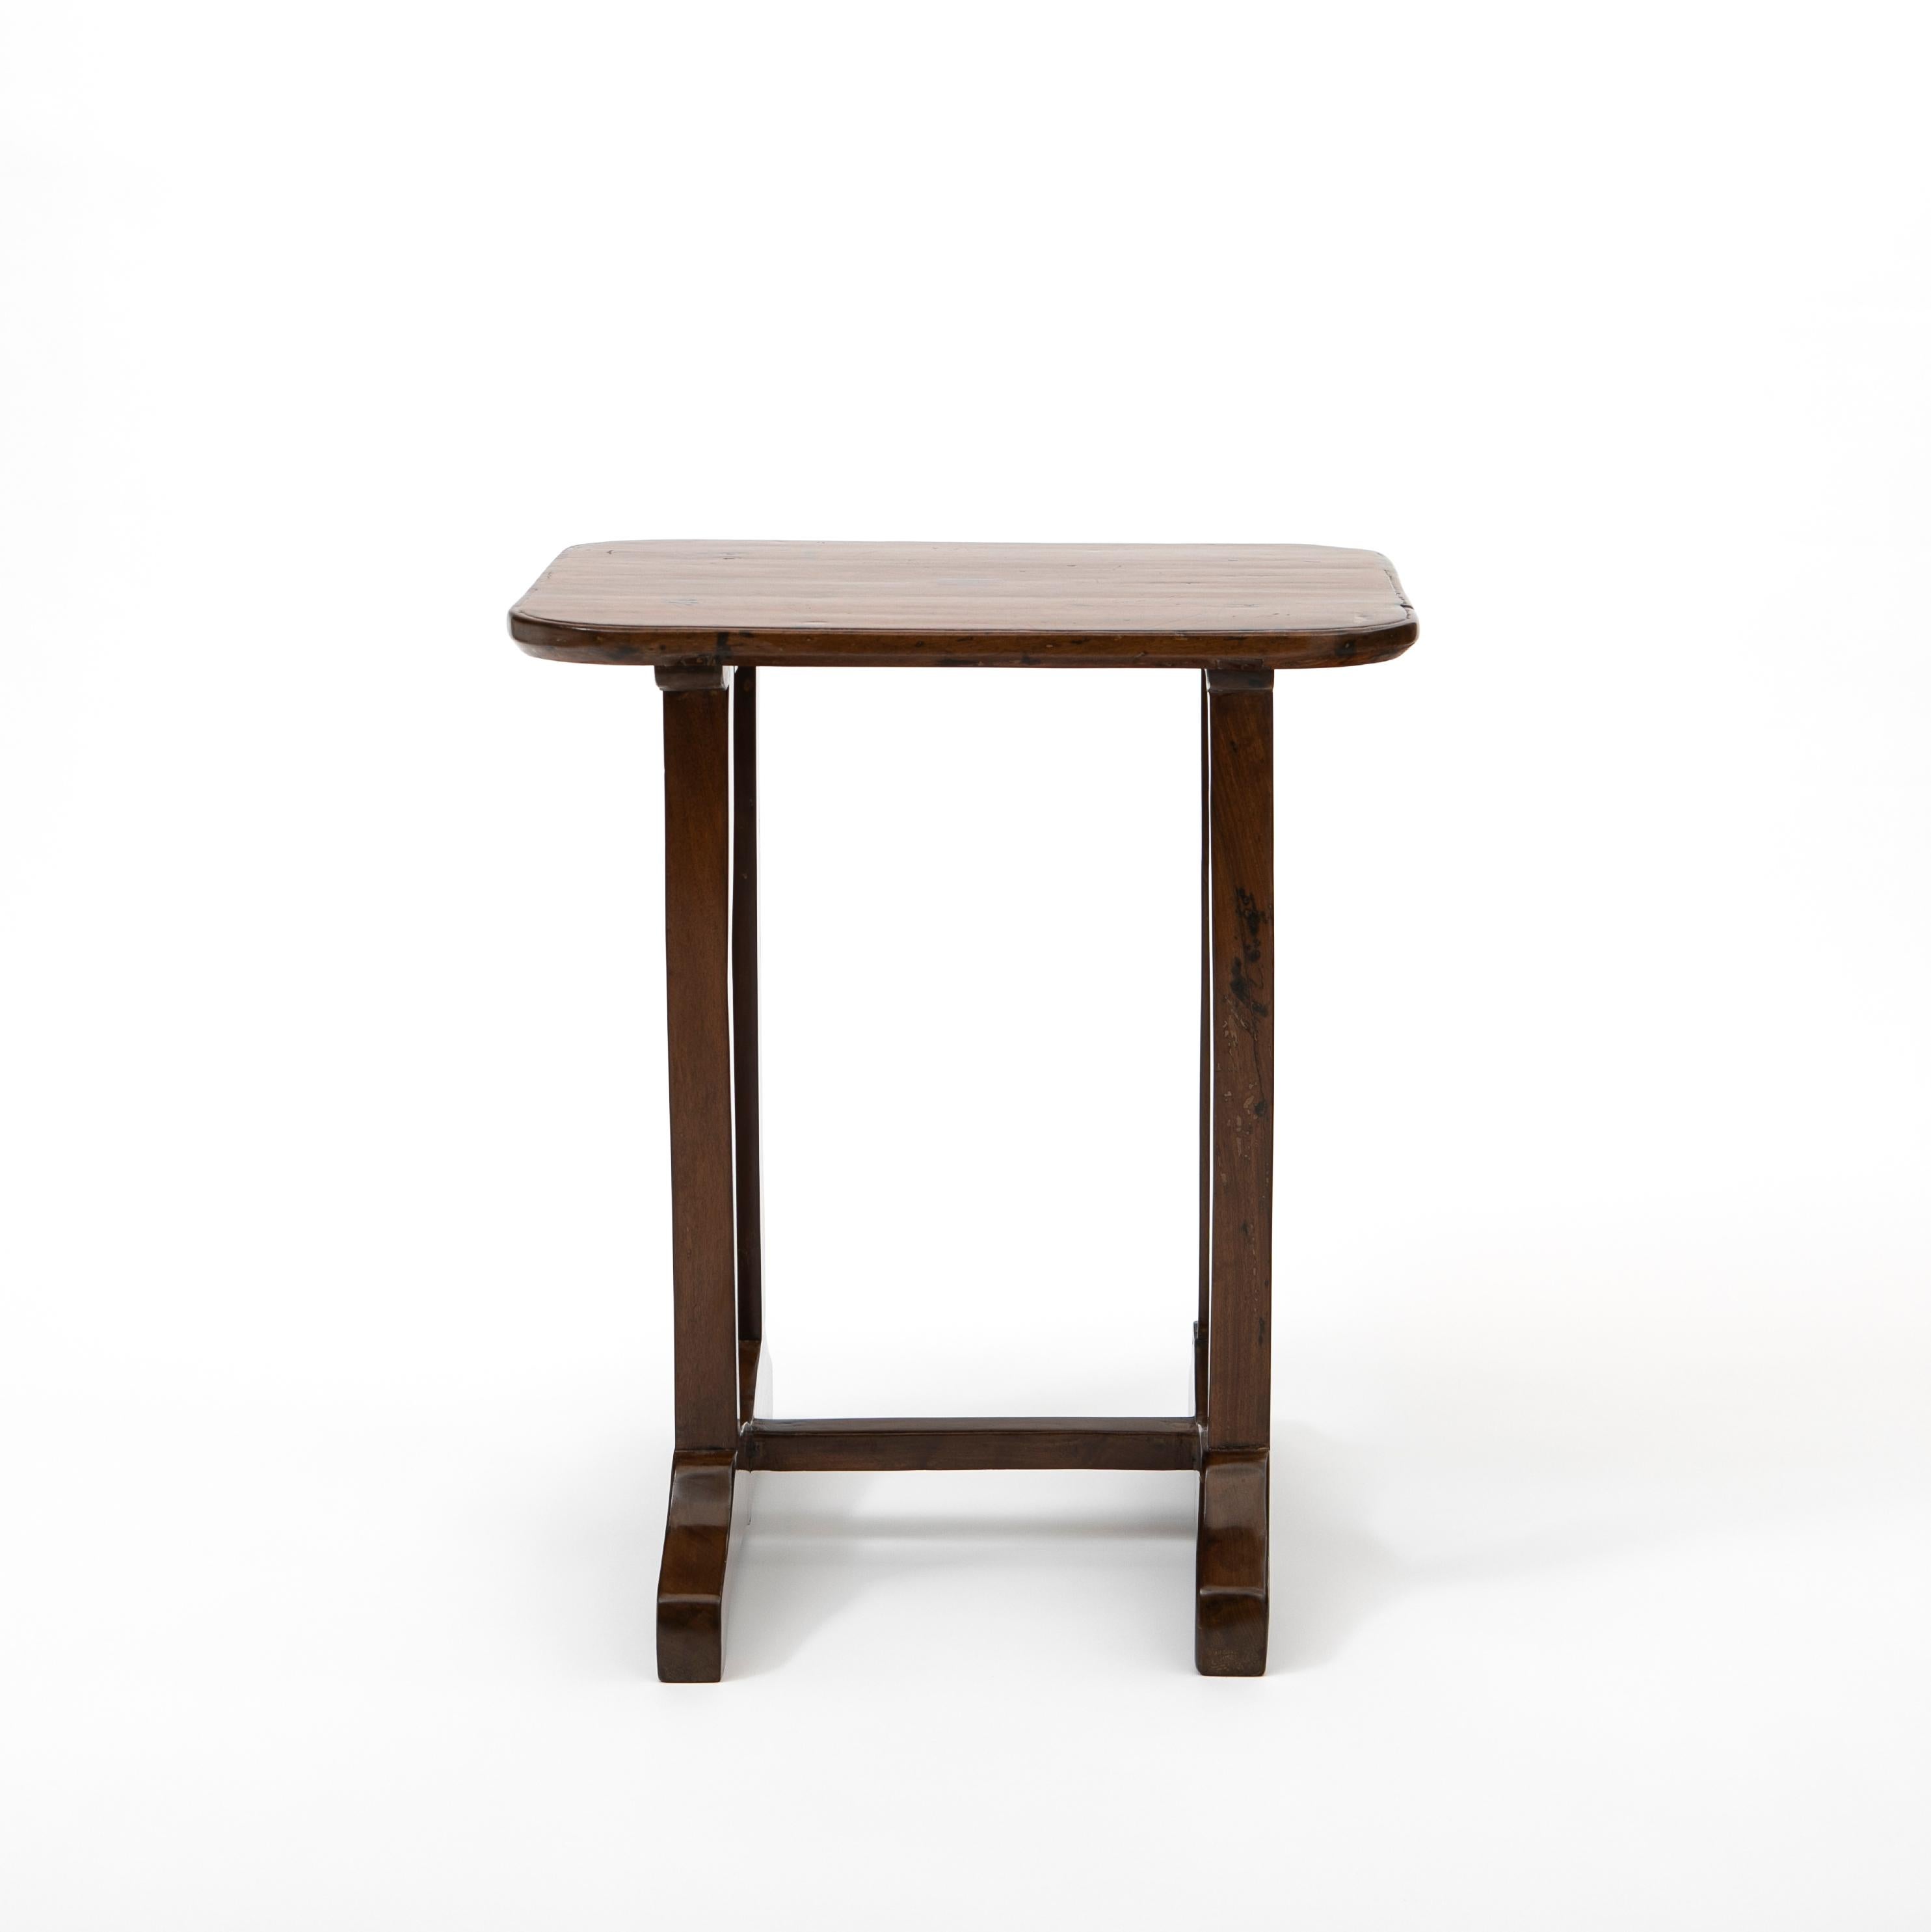 Elegant 19th century solid Narra wood side table from the Philippines.
Rectangular table top with rounded corners made from one solid piece of narra wood.
The Philippines were a Spanish colony for over 300 years, so this is a wonderful example of